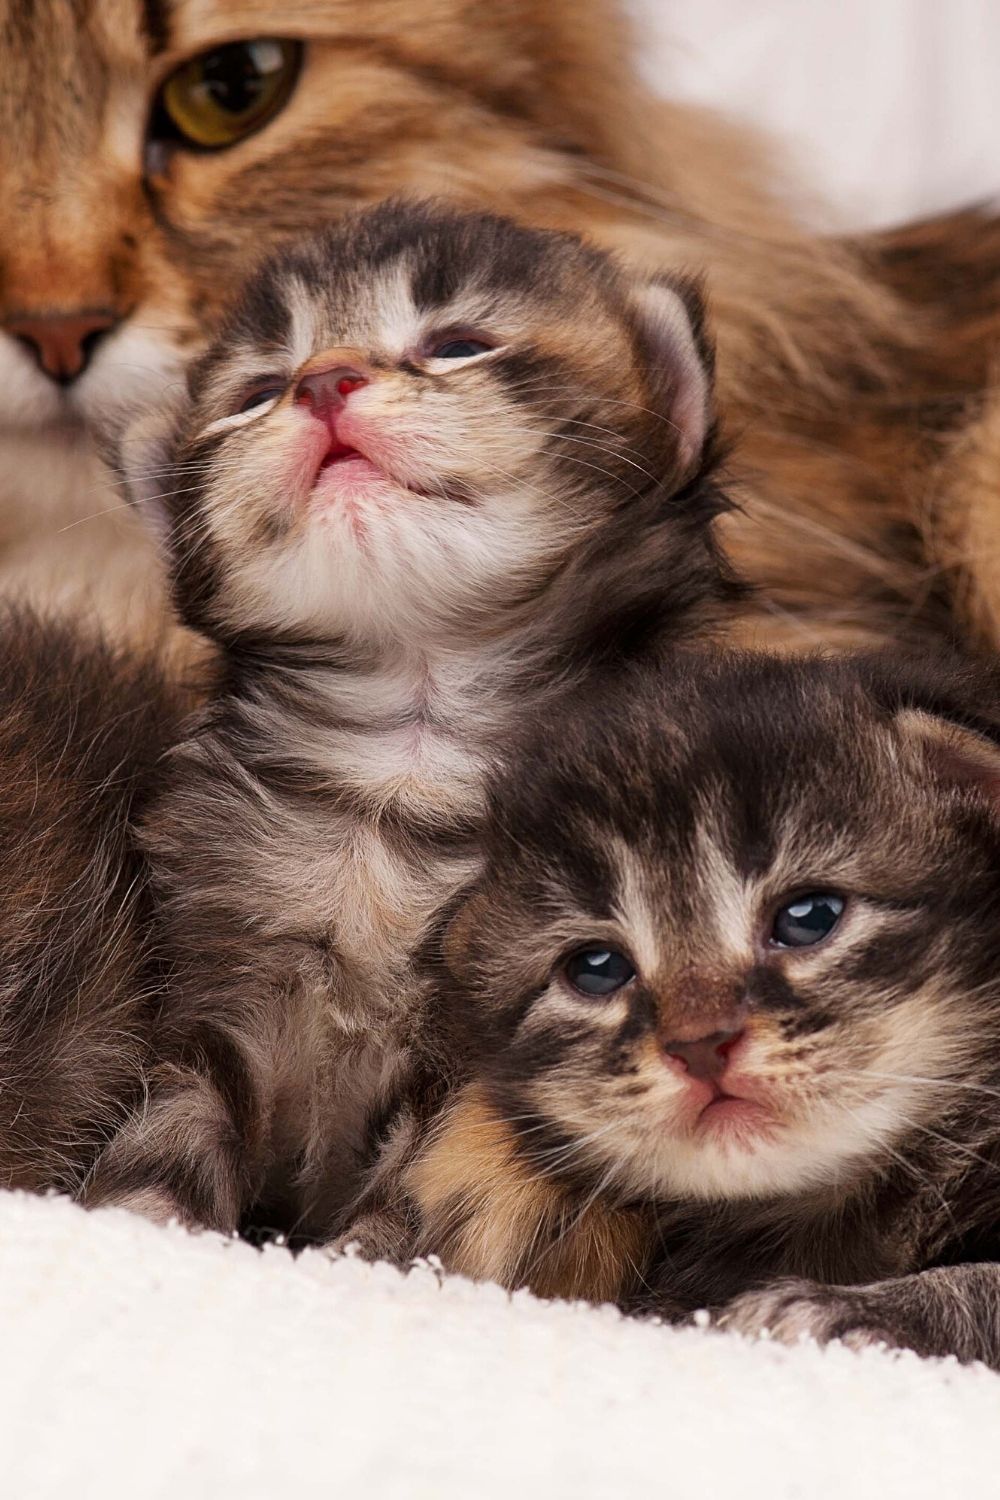 Most municipalities exempt kittens in counting the number of cats per household